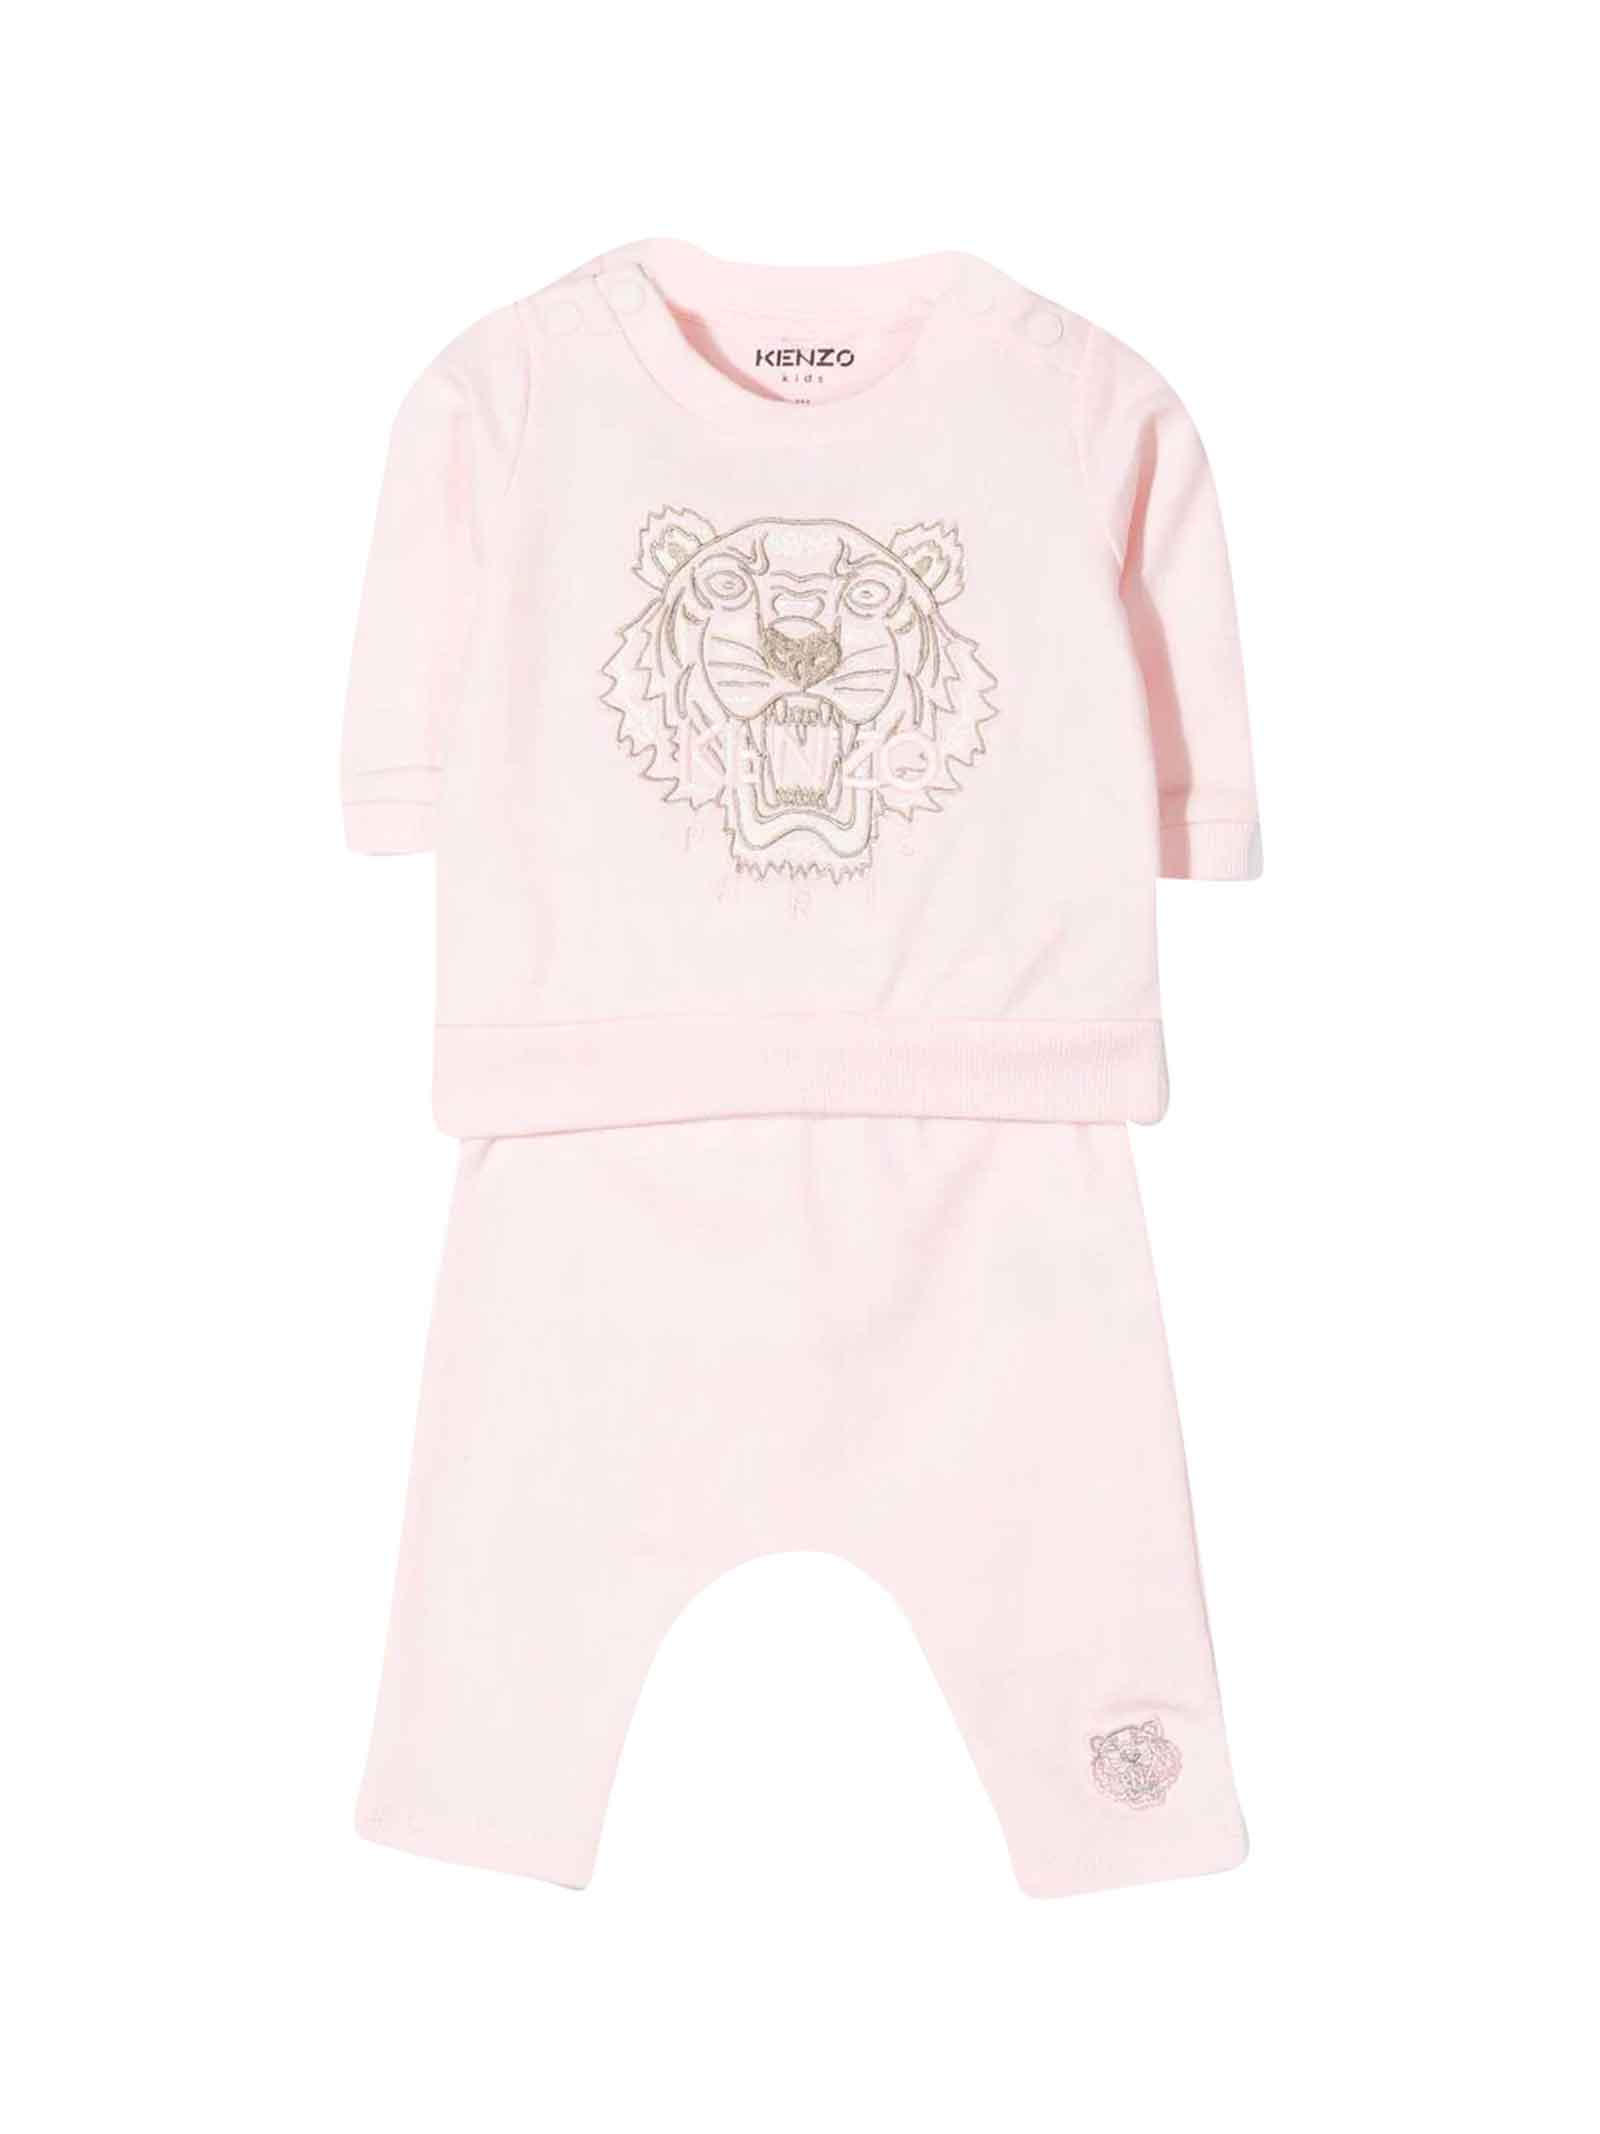 Kenzo Kids Pink Baby Girl Sports Suit, With Tiger Print On The Front. Long-sleeved Sweatshirt, Round Neck And Trousers With Elasticated Waist.